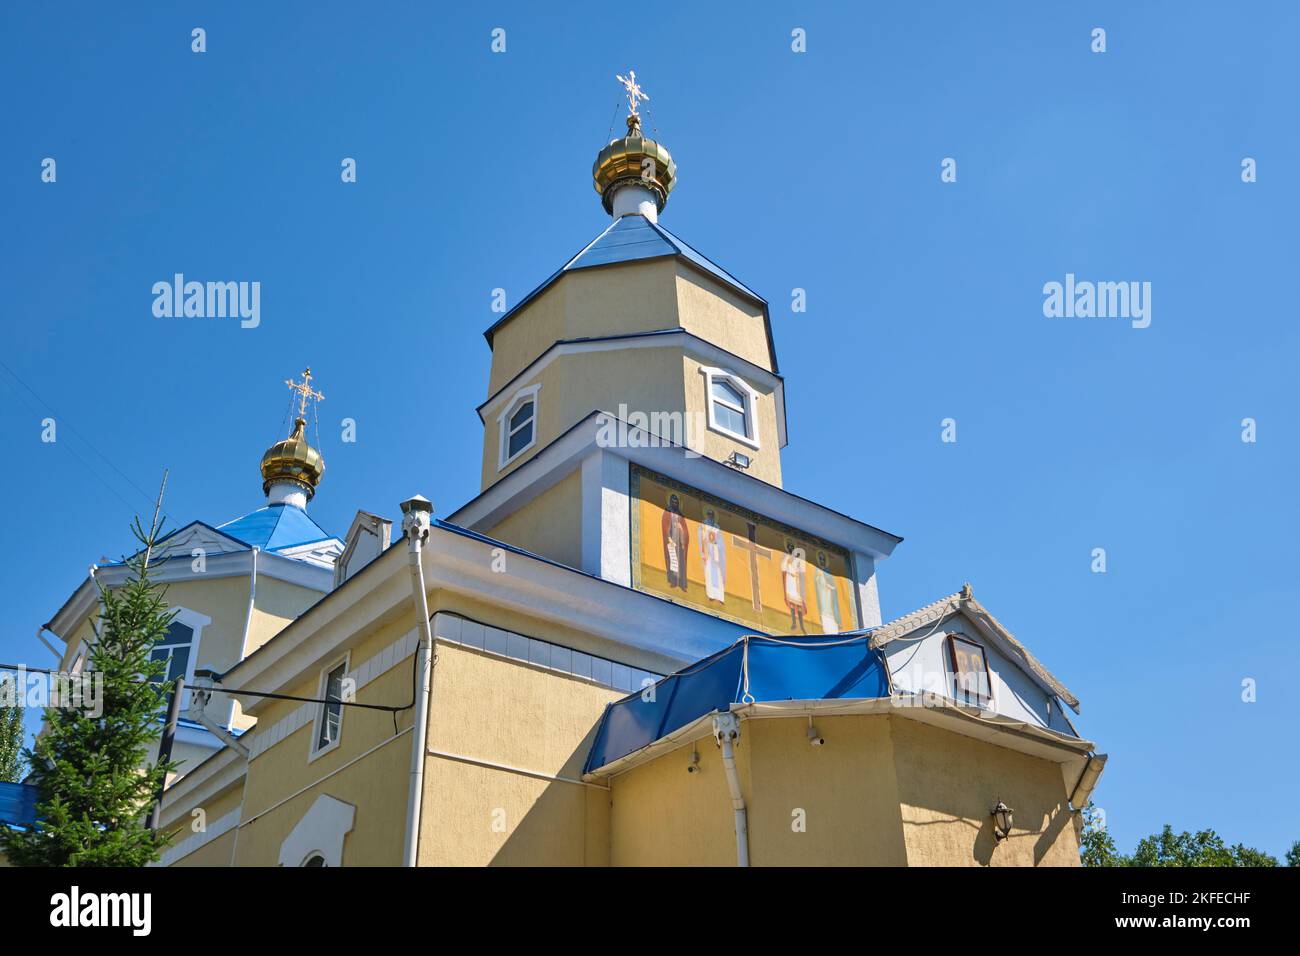 Exterior view of the yellow and blue, Tsarist era, Russian Saints Constantine and Helen Orthodox Cathedral. In Astana, Nur Sultan, Kazakhstan. Stock Photo